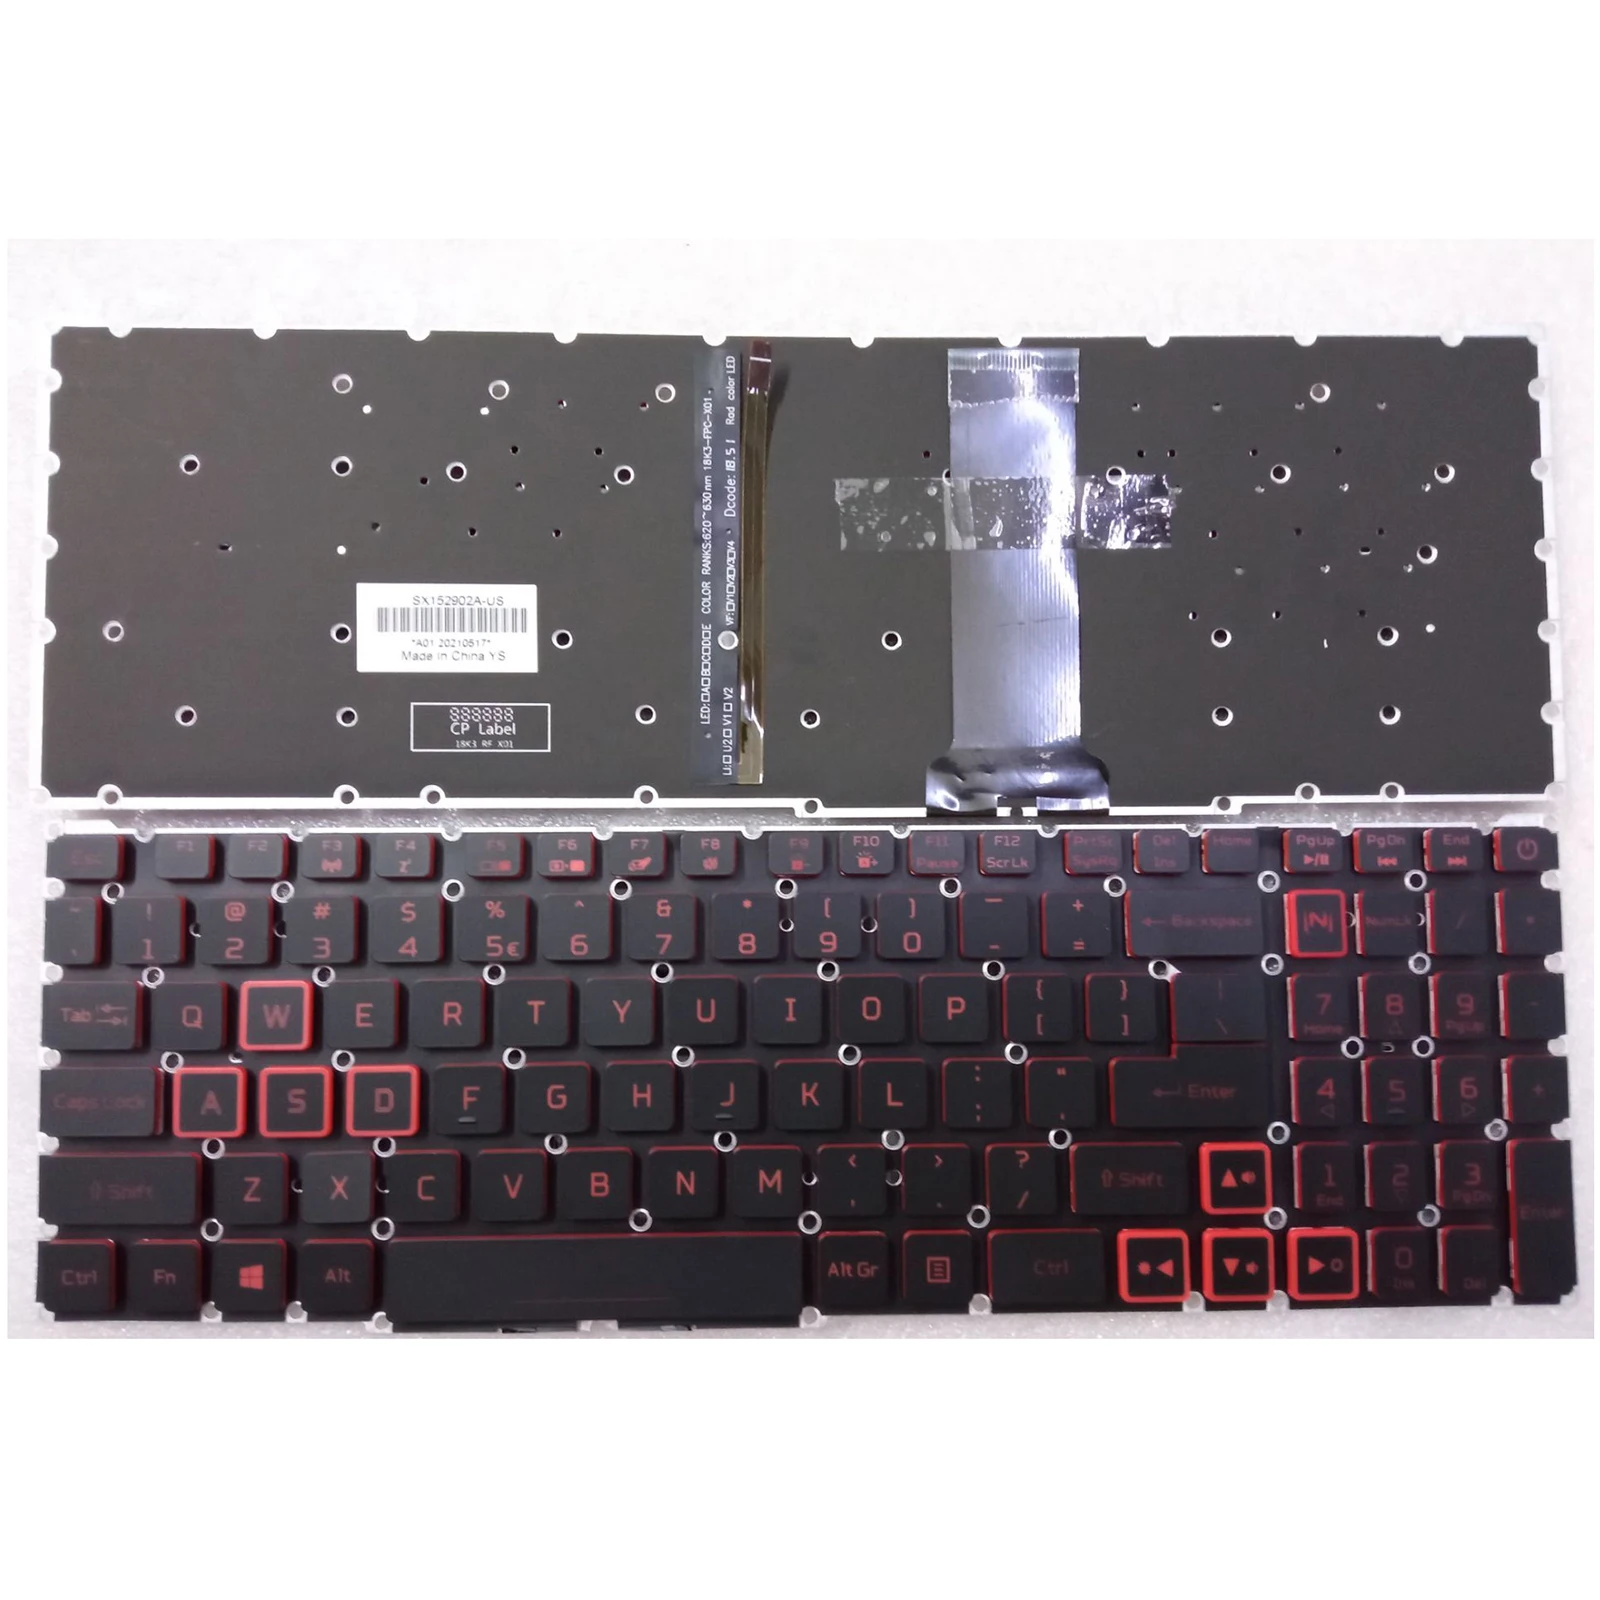 

US/RU/SP/BR Keyboard RGB backlit For Acer Nitro 5 7 AN515-54 43 44 AN515-55 AN517-51 52 AN715-51 Gaming laptop keyboards LG5P P9